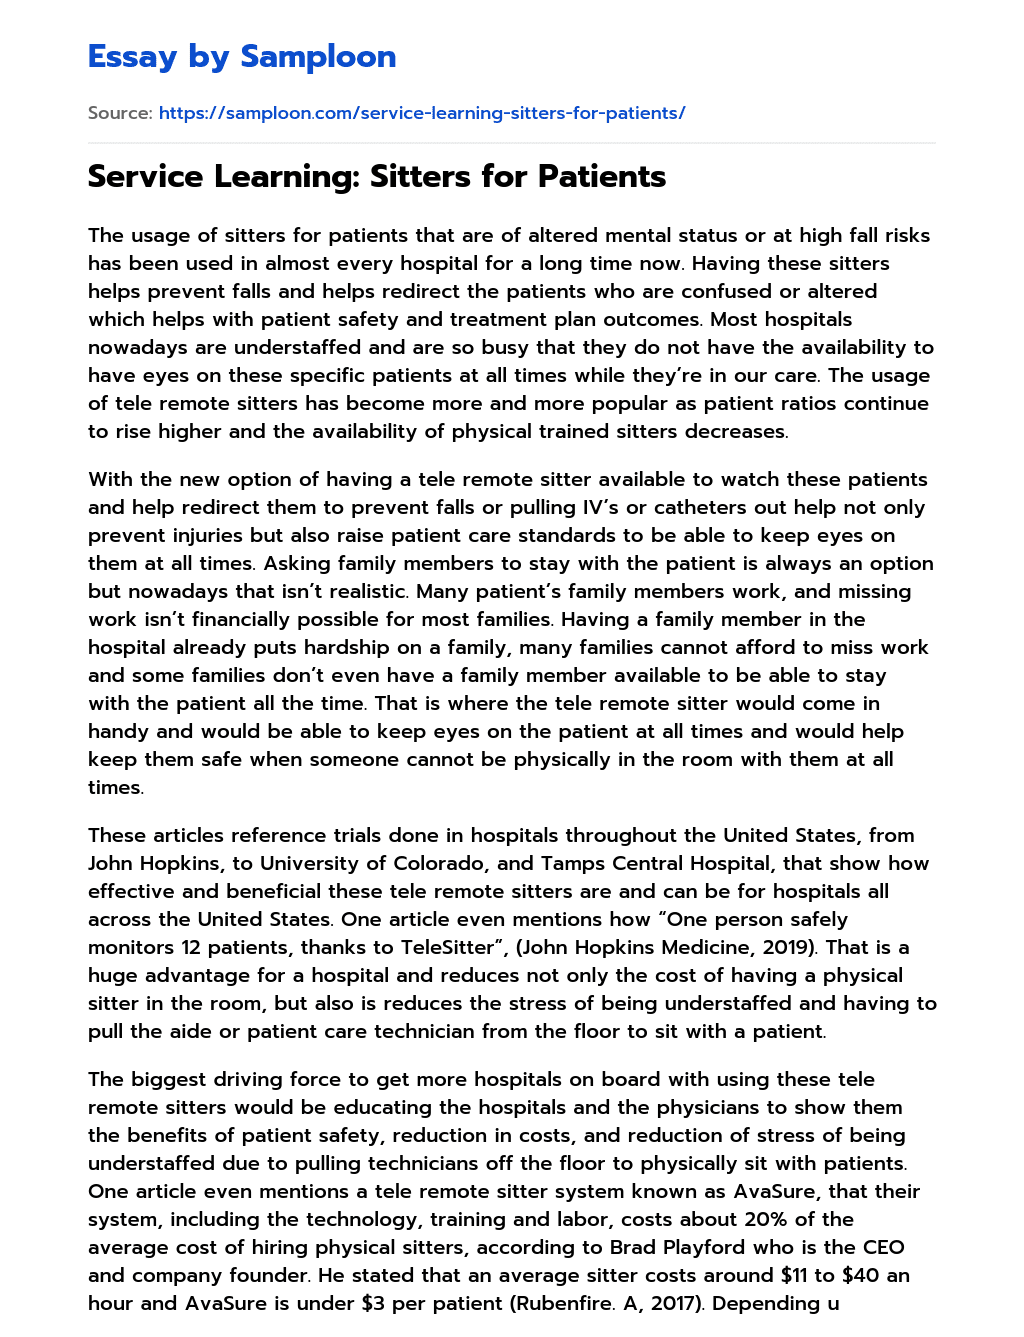 Service Learning: Sitters for Patients essay